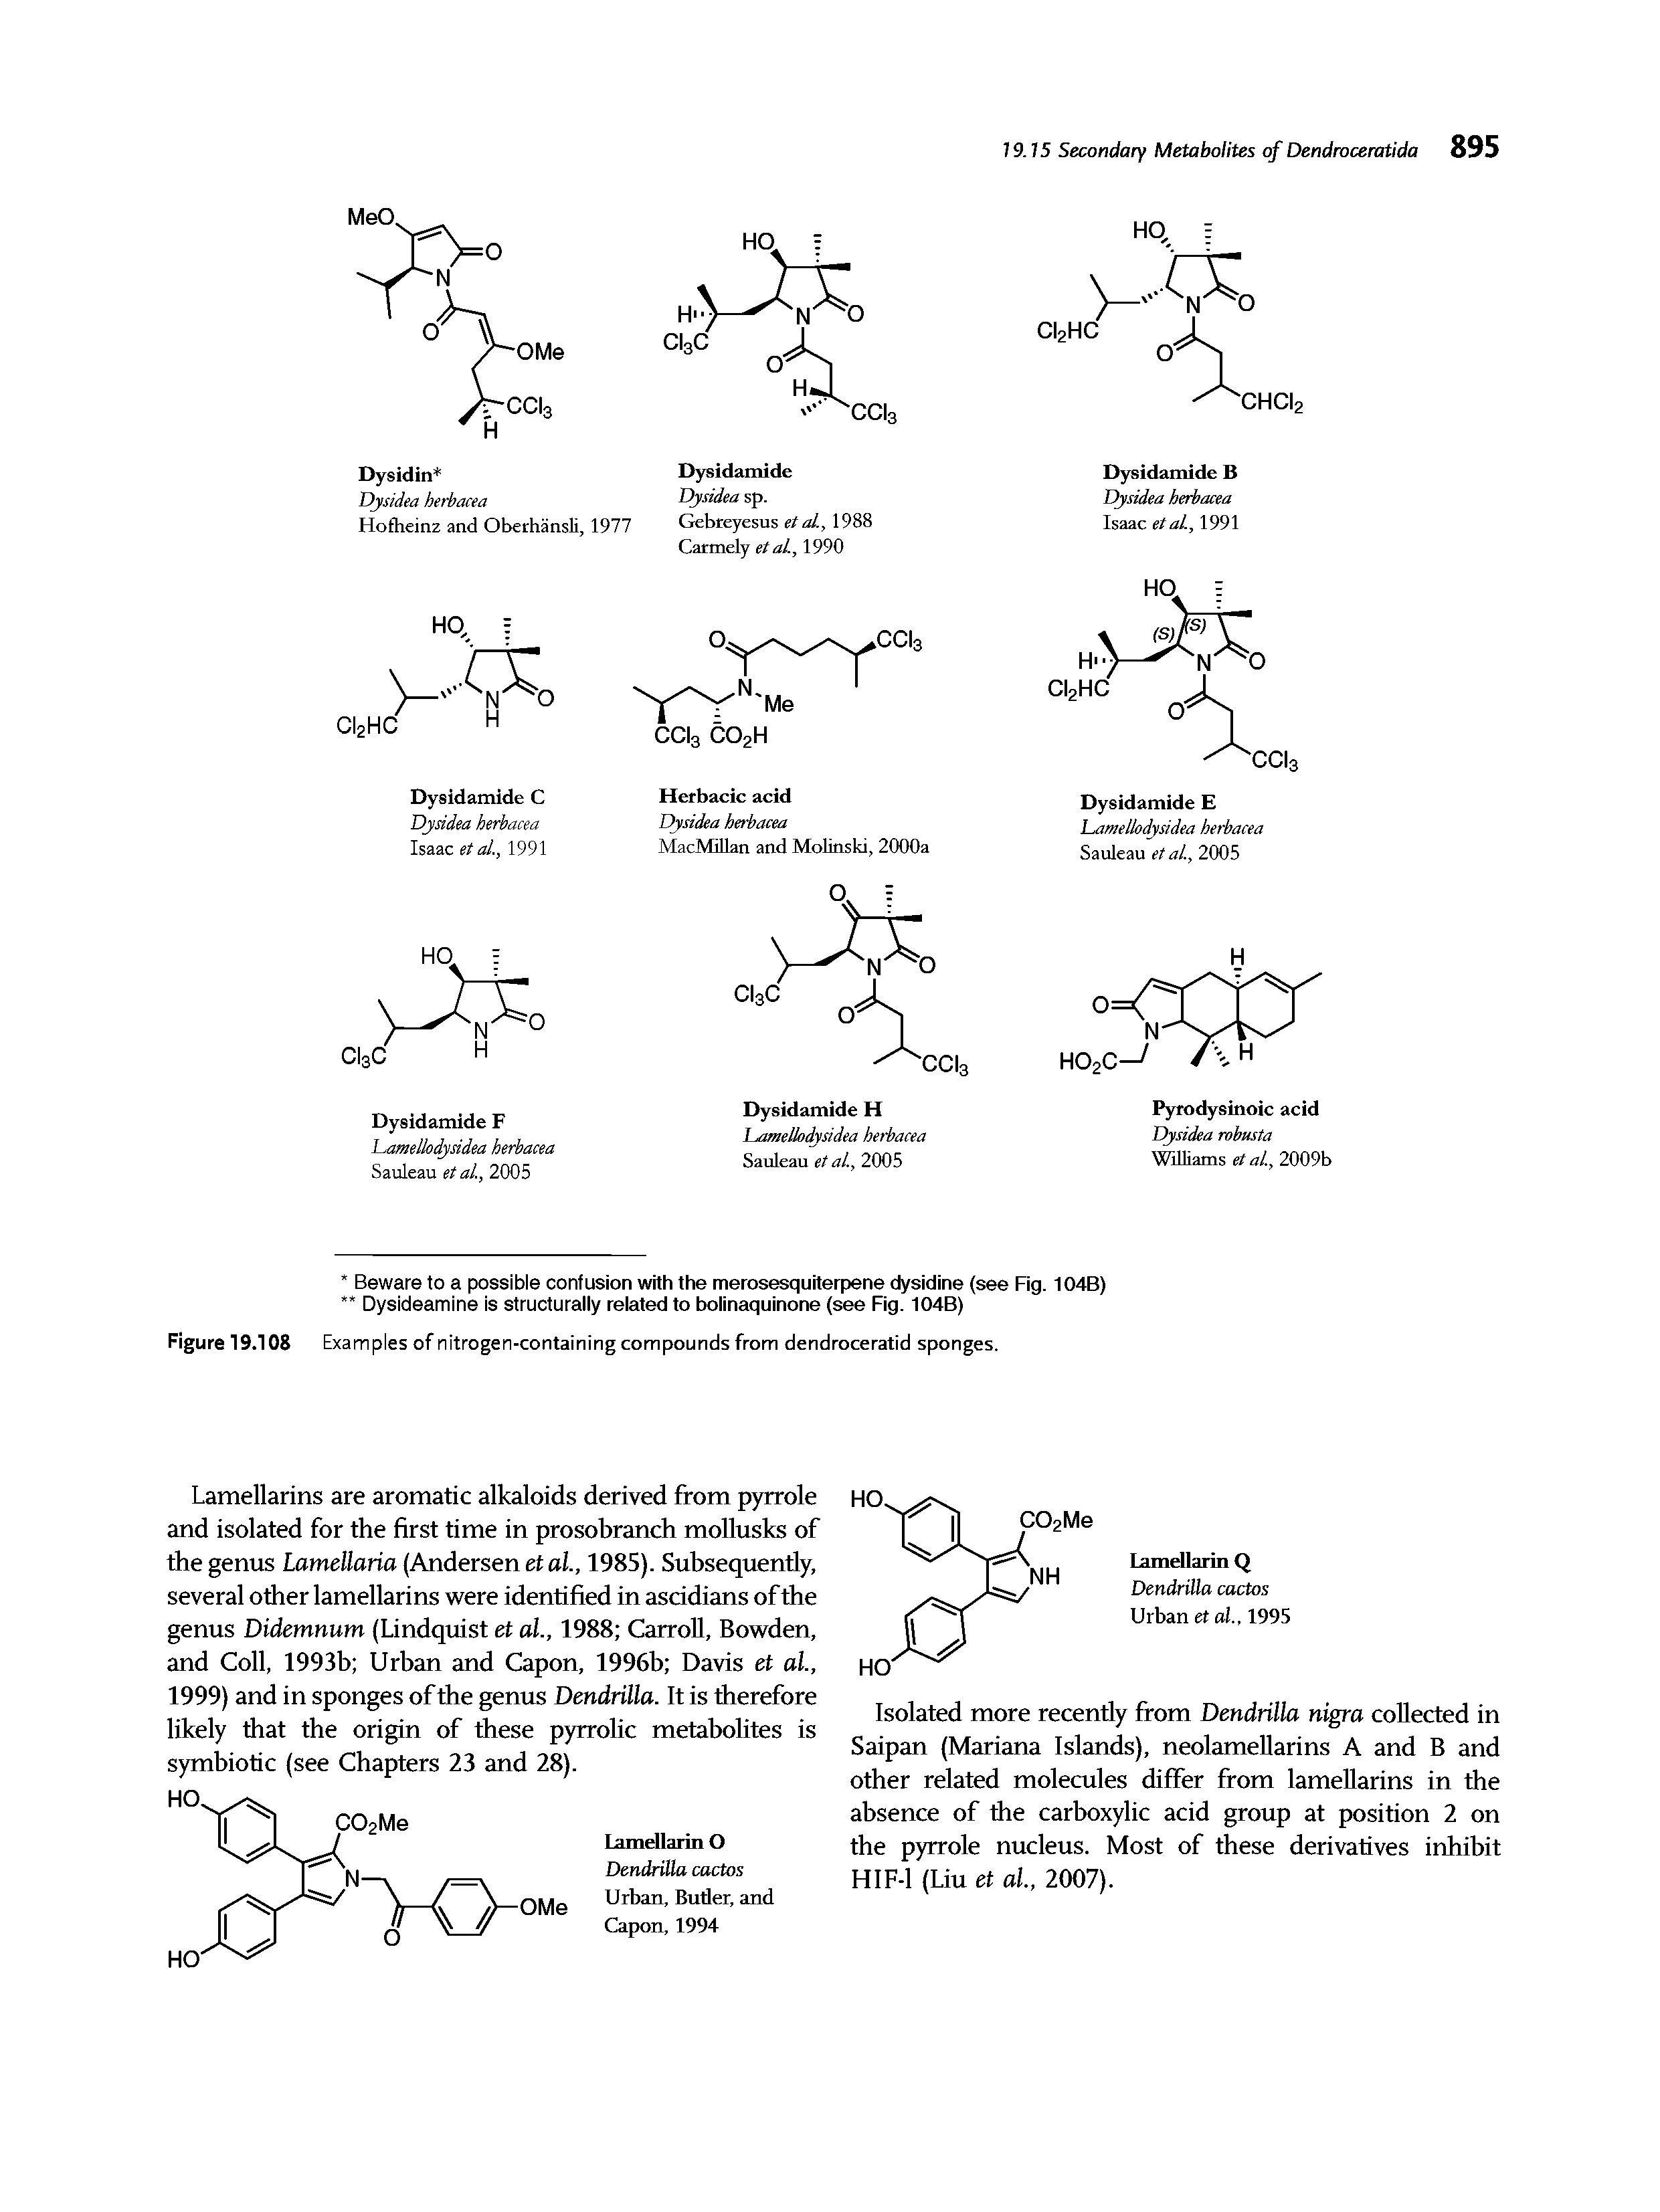 Figure 19.108 Examples of nitrogen-containing compounds from dendroceratid sponges.